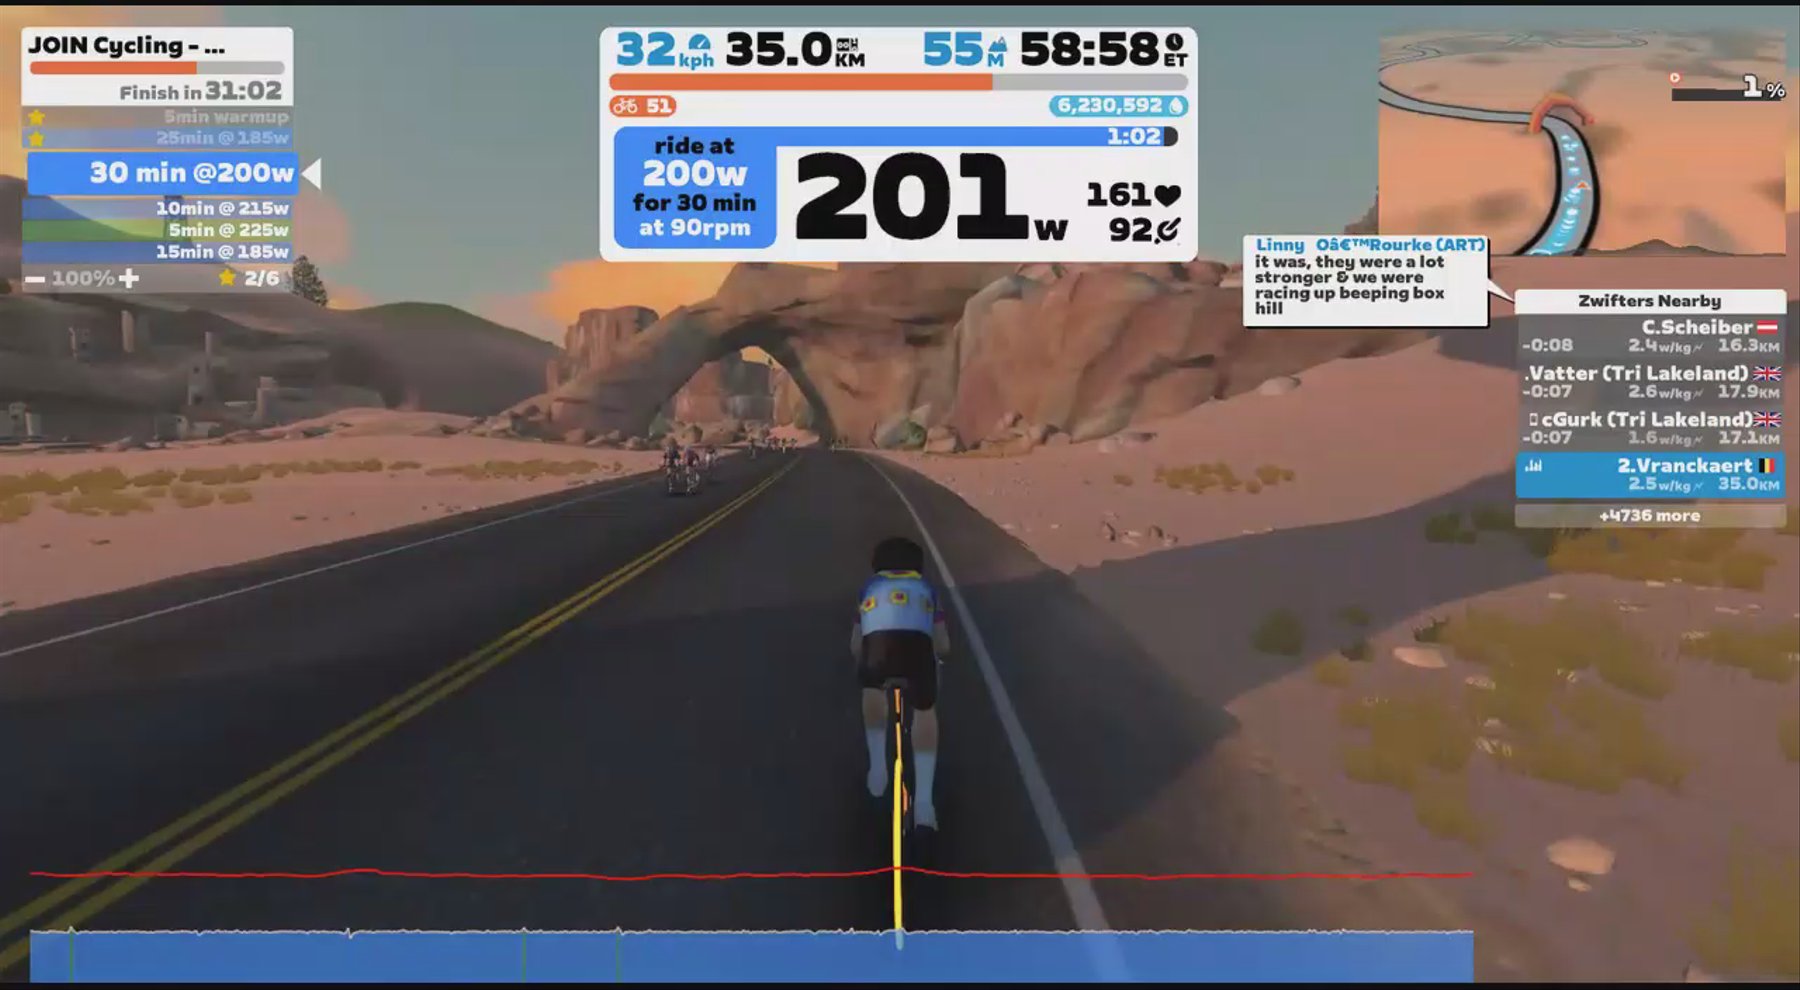 Zwift - JOIN Cycling - Tempo steigerung in Watopia